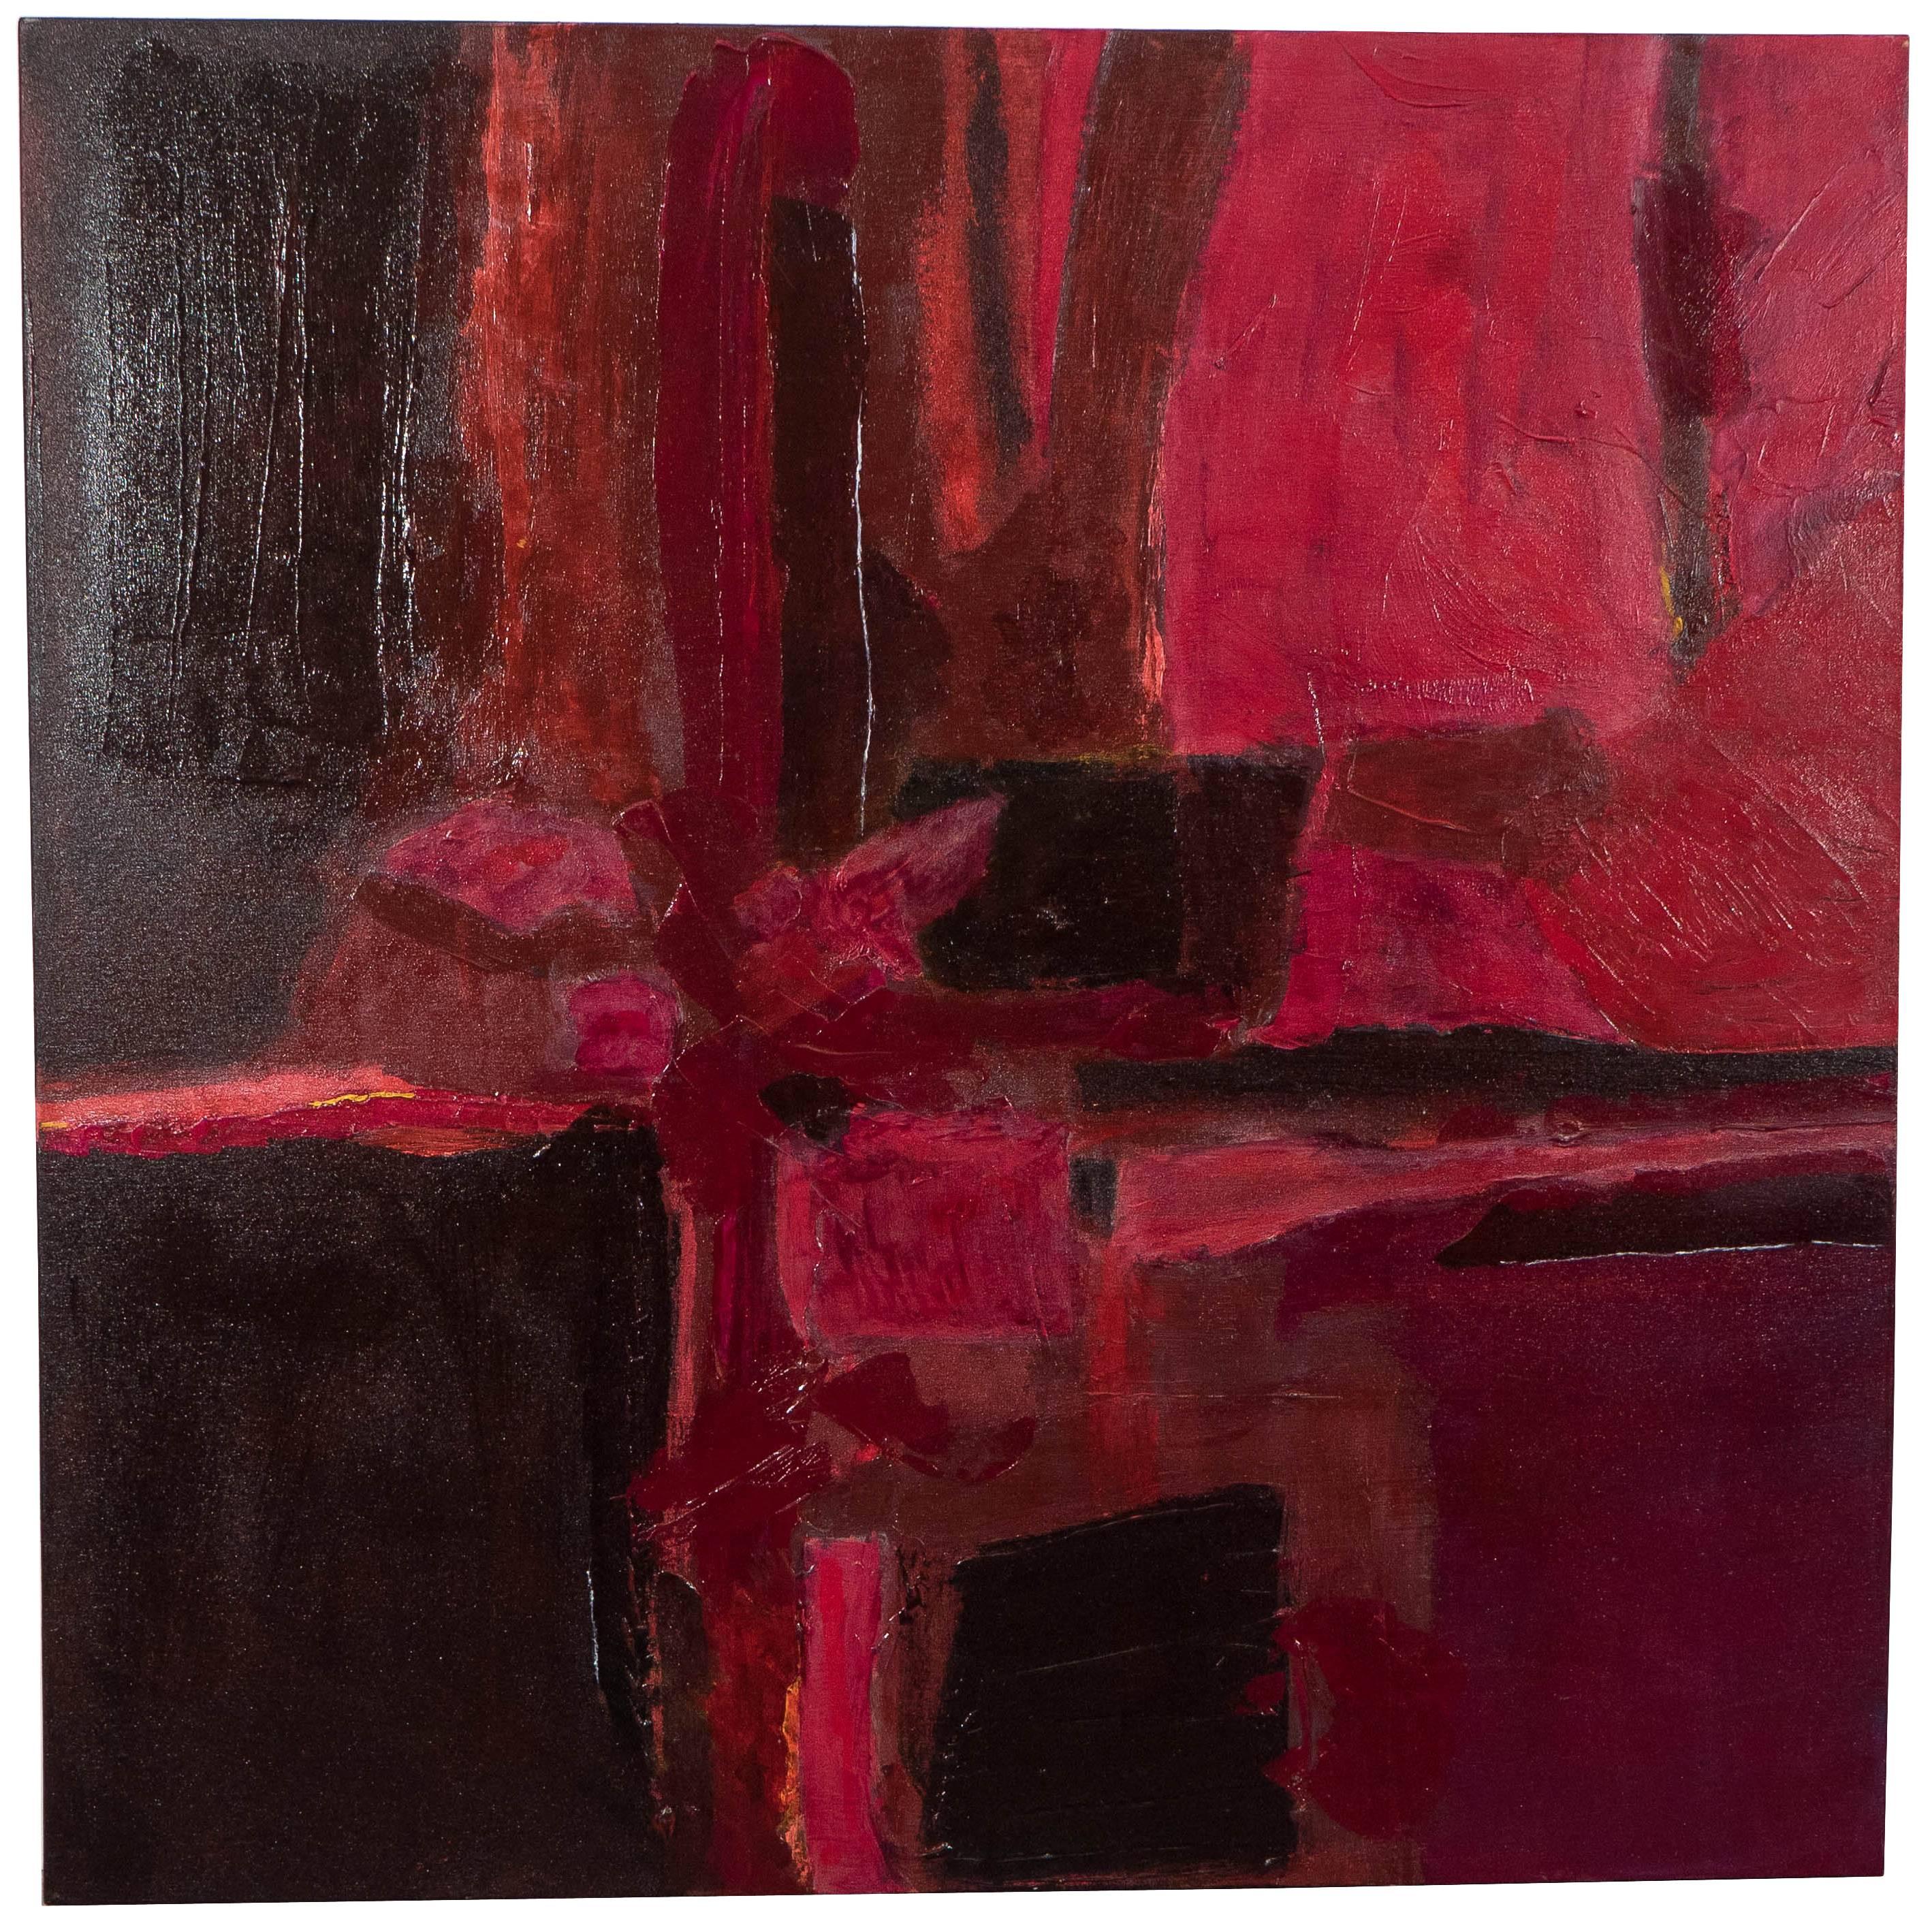 Abstract Expressionist Painting in Tones of Red